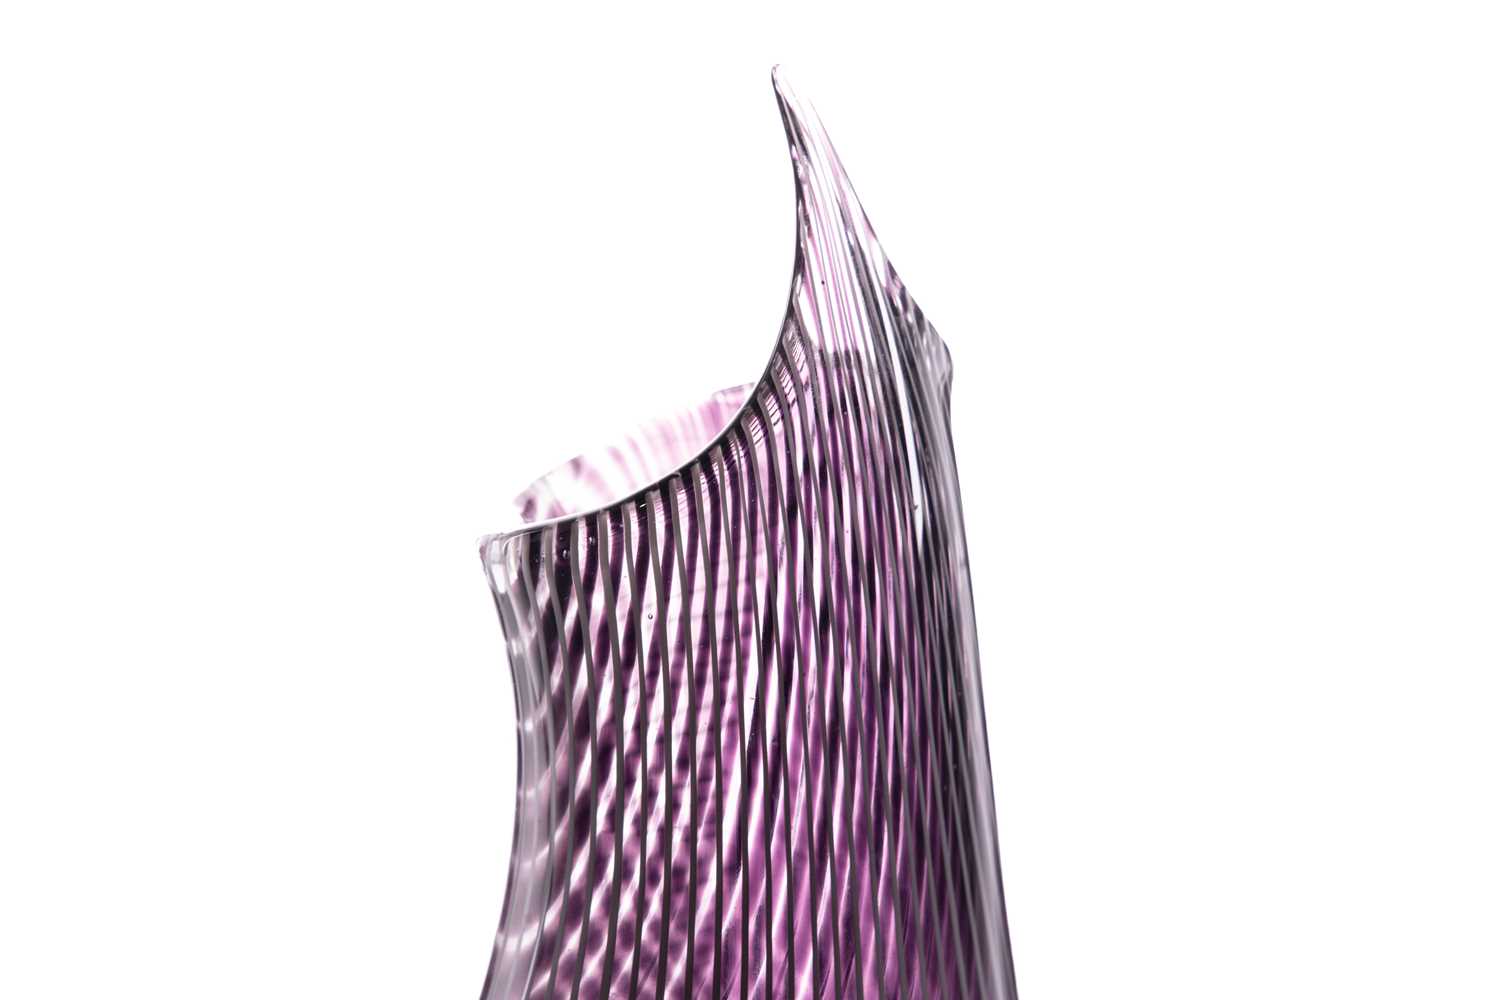 A Luca Vidal Murano large art glass vase with textured finish to one side, bespoke made for the - Image 6 of 9